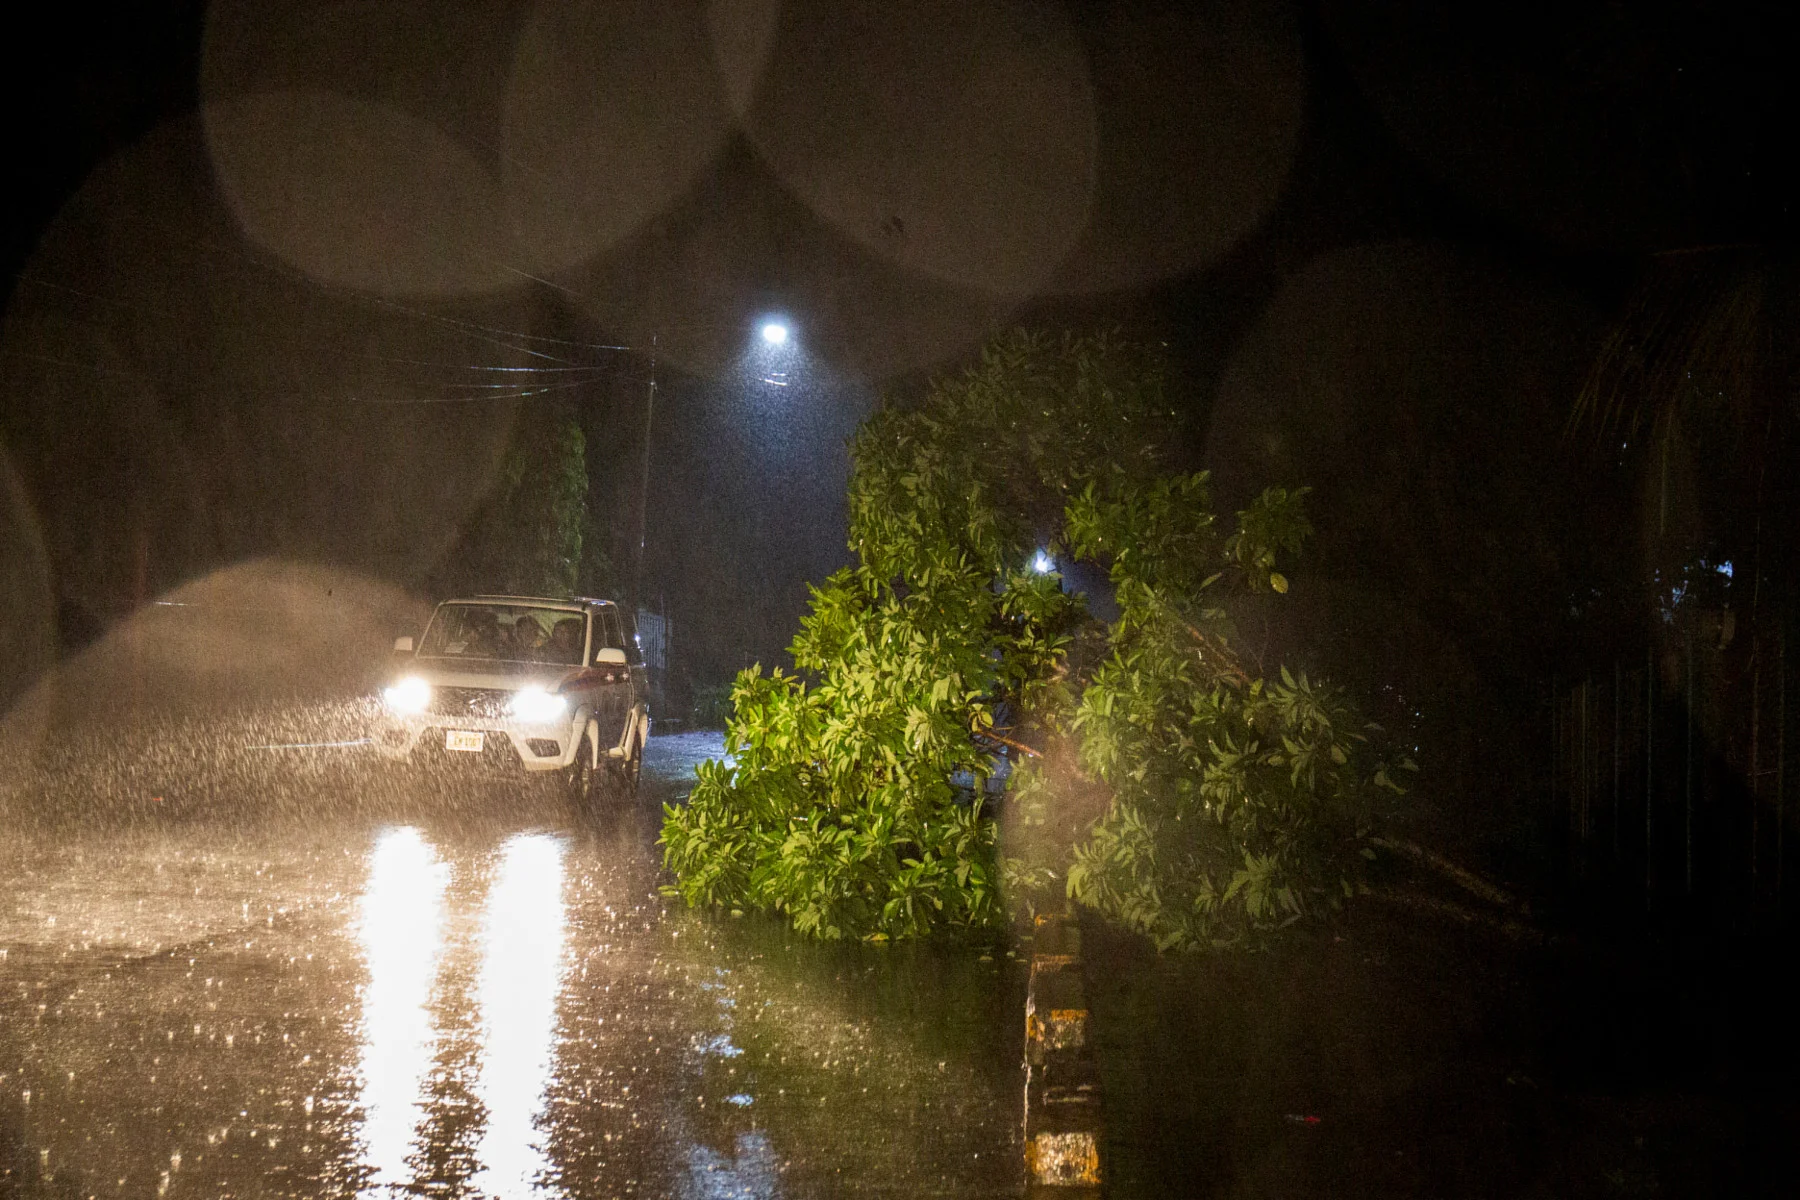 People in a vehicle drive past a fallen tree after Hurricane Julia hits the coasts with wind and rain, in Bluefields, Nicaragua October 8, 2022. (REUTERS/Maynor Valenzuela)